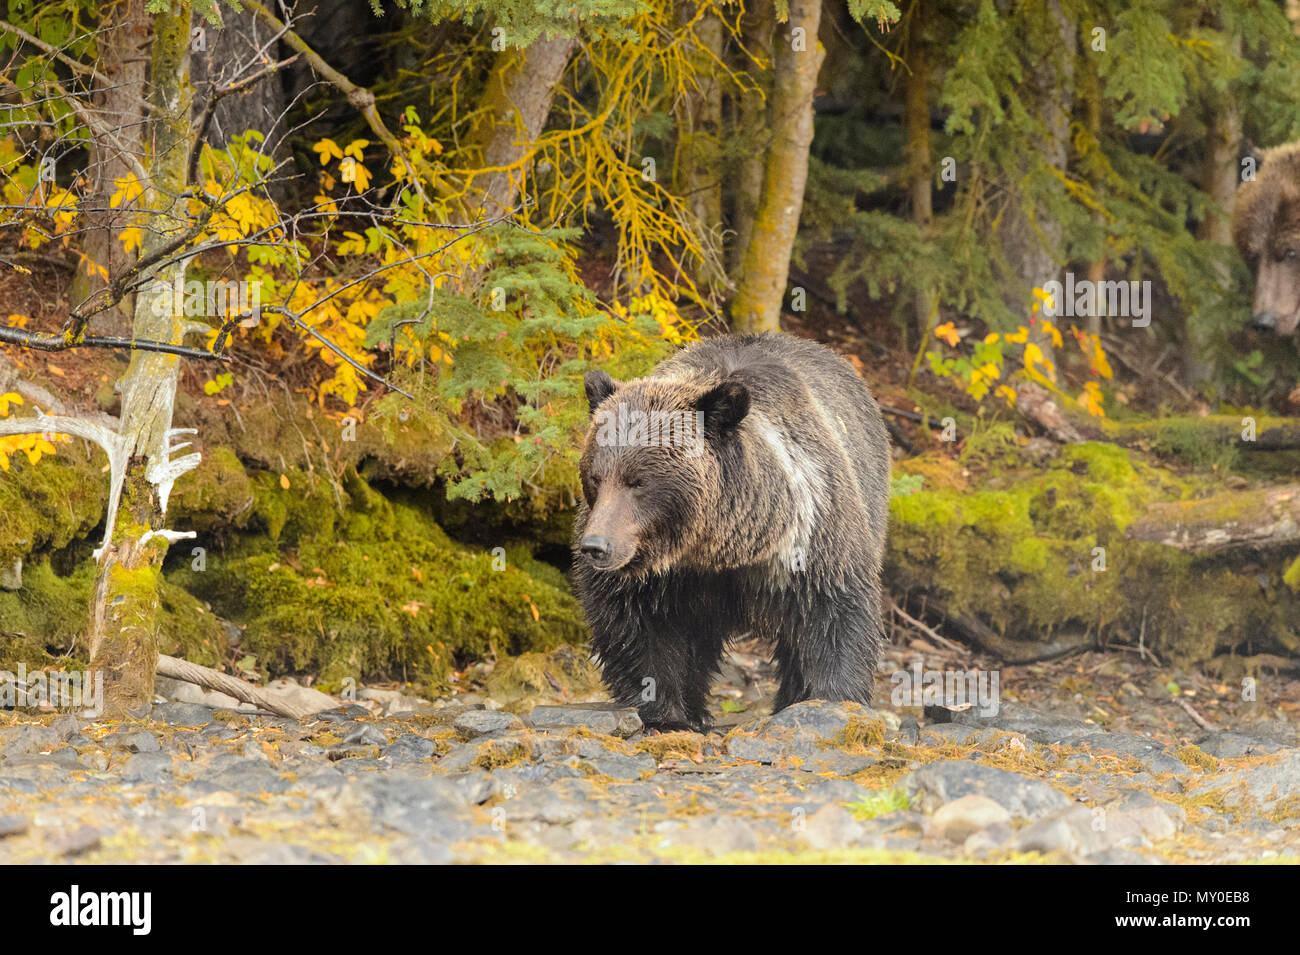 Grizzly bear (Ursus arctos)- Yearling cub standing on shore of a salmon river, Chilcotin Wilderness, British Columbia BC, Canada Stock Photo